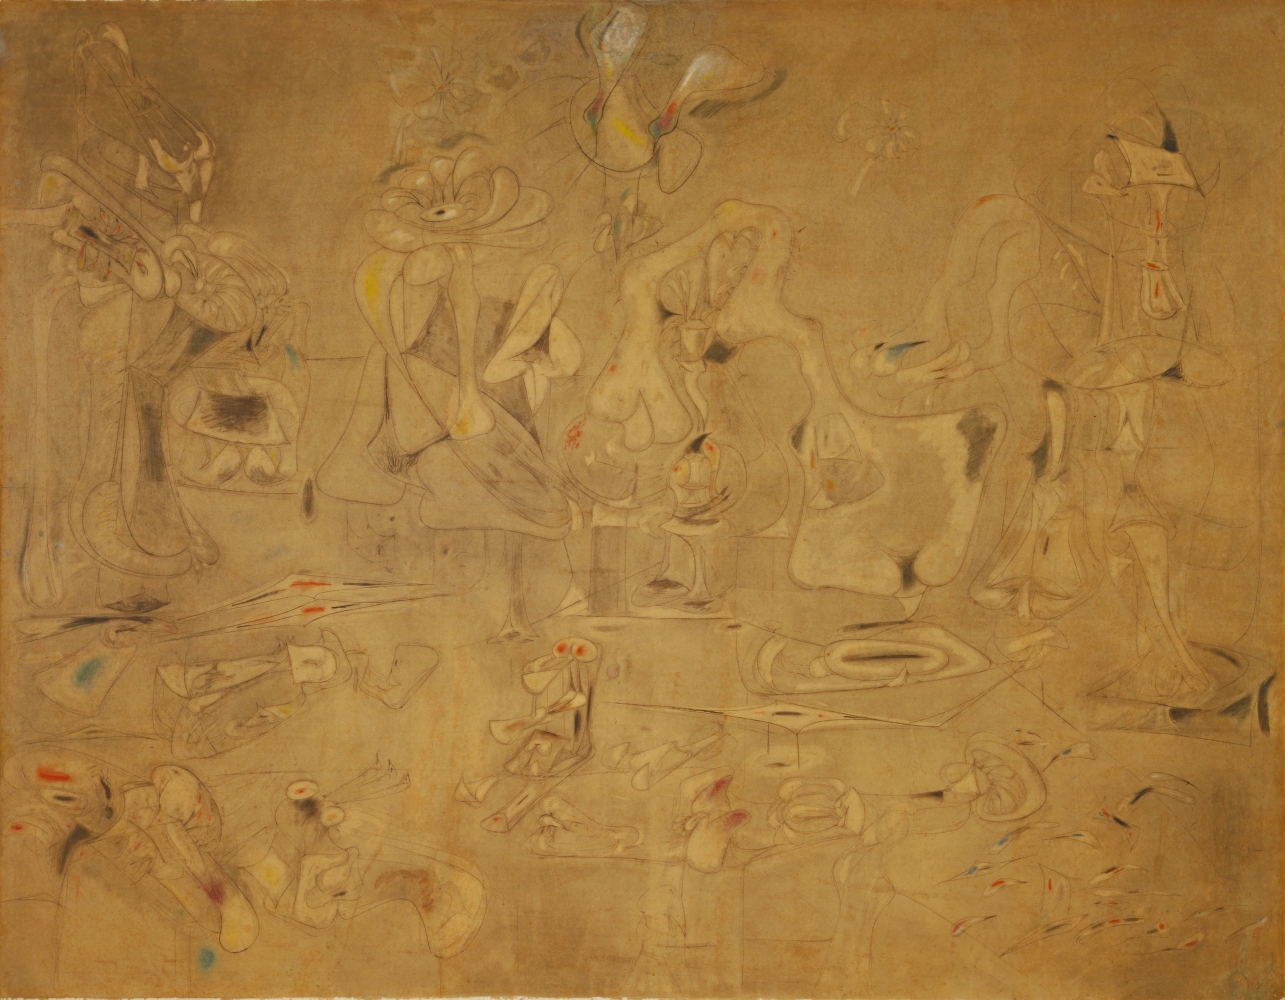 Summation, 1947,&nbsp;charcoal, graphite pencil, and pastel on paper mounted on board, 79 5/8 x 101 3/4 in. (202.2 x 258.4 cm). The Museum of Modern Art, New York. Nina and Gordon Bunshaft Fund, 234.1969. Digital Image &copy; The Museum of Modern Art/Licensed by SCALA / Art Resource, NY.&nbsp;[AGCR: D1486]